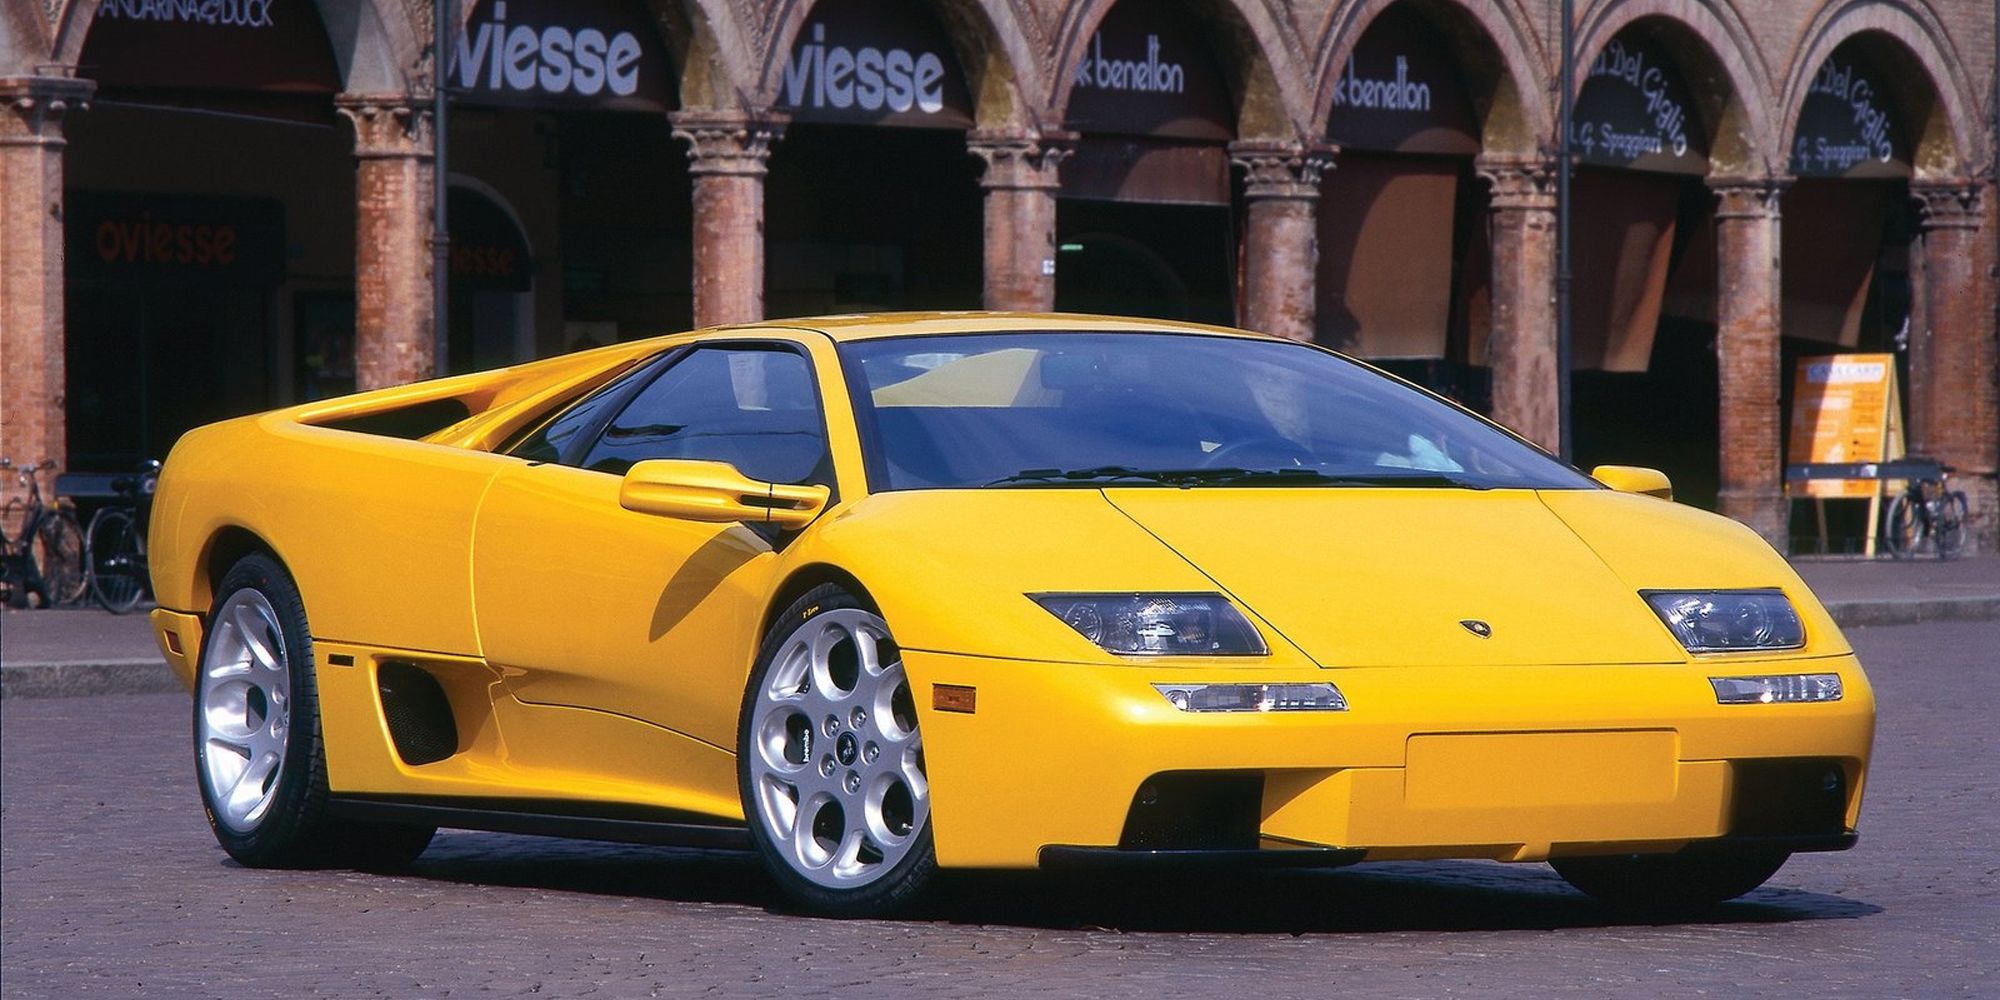 The front of the Diablo 6.0